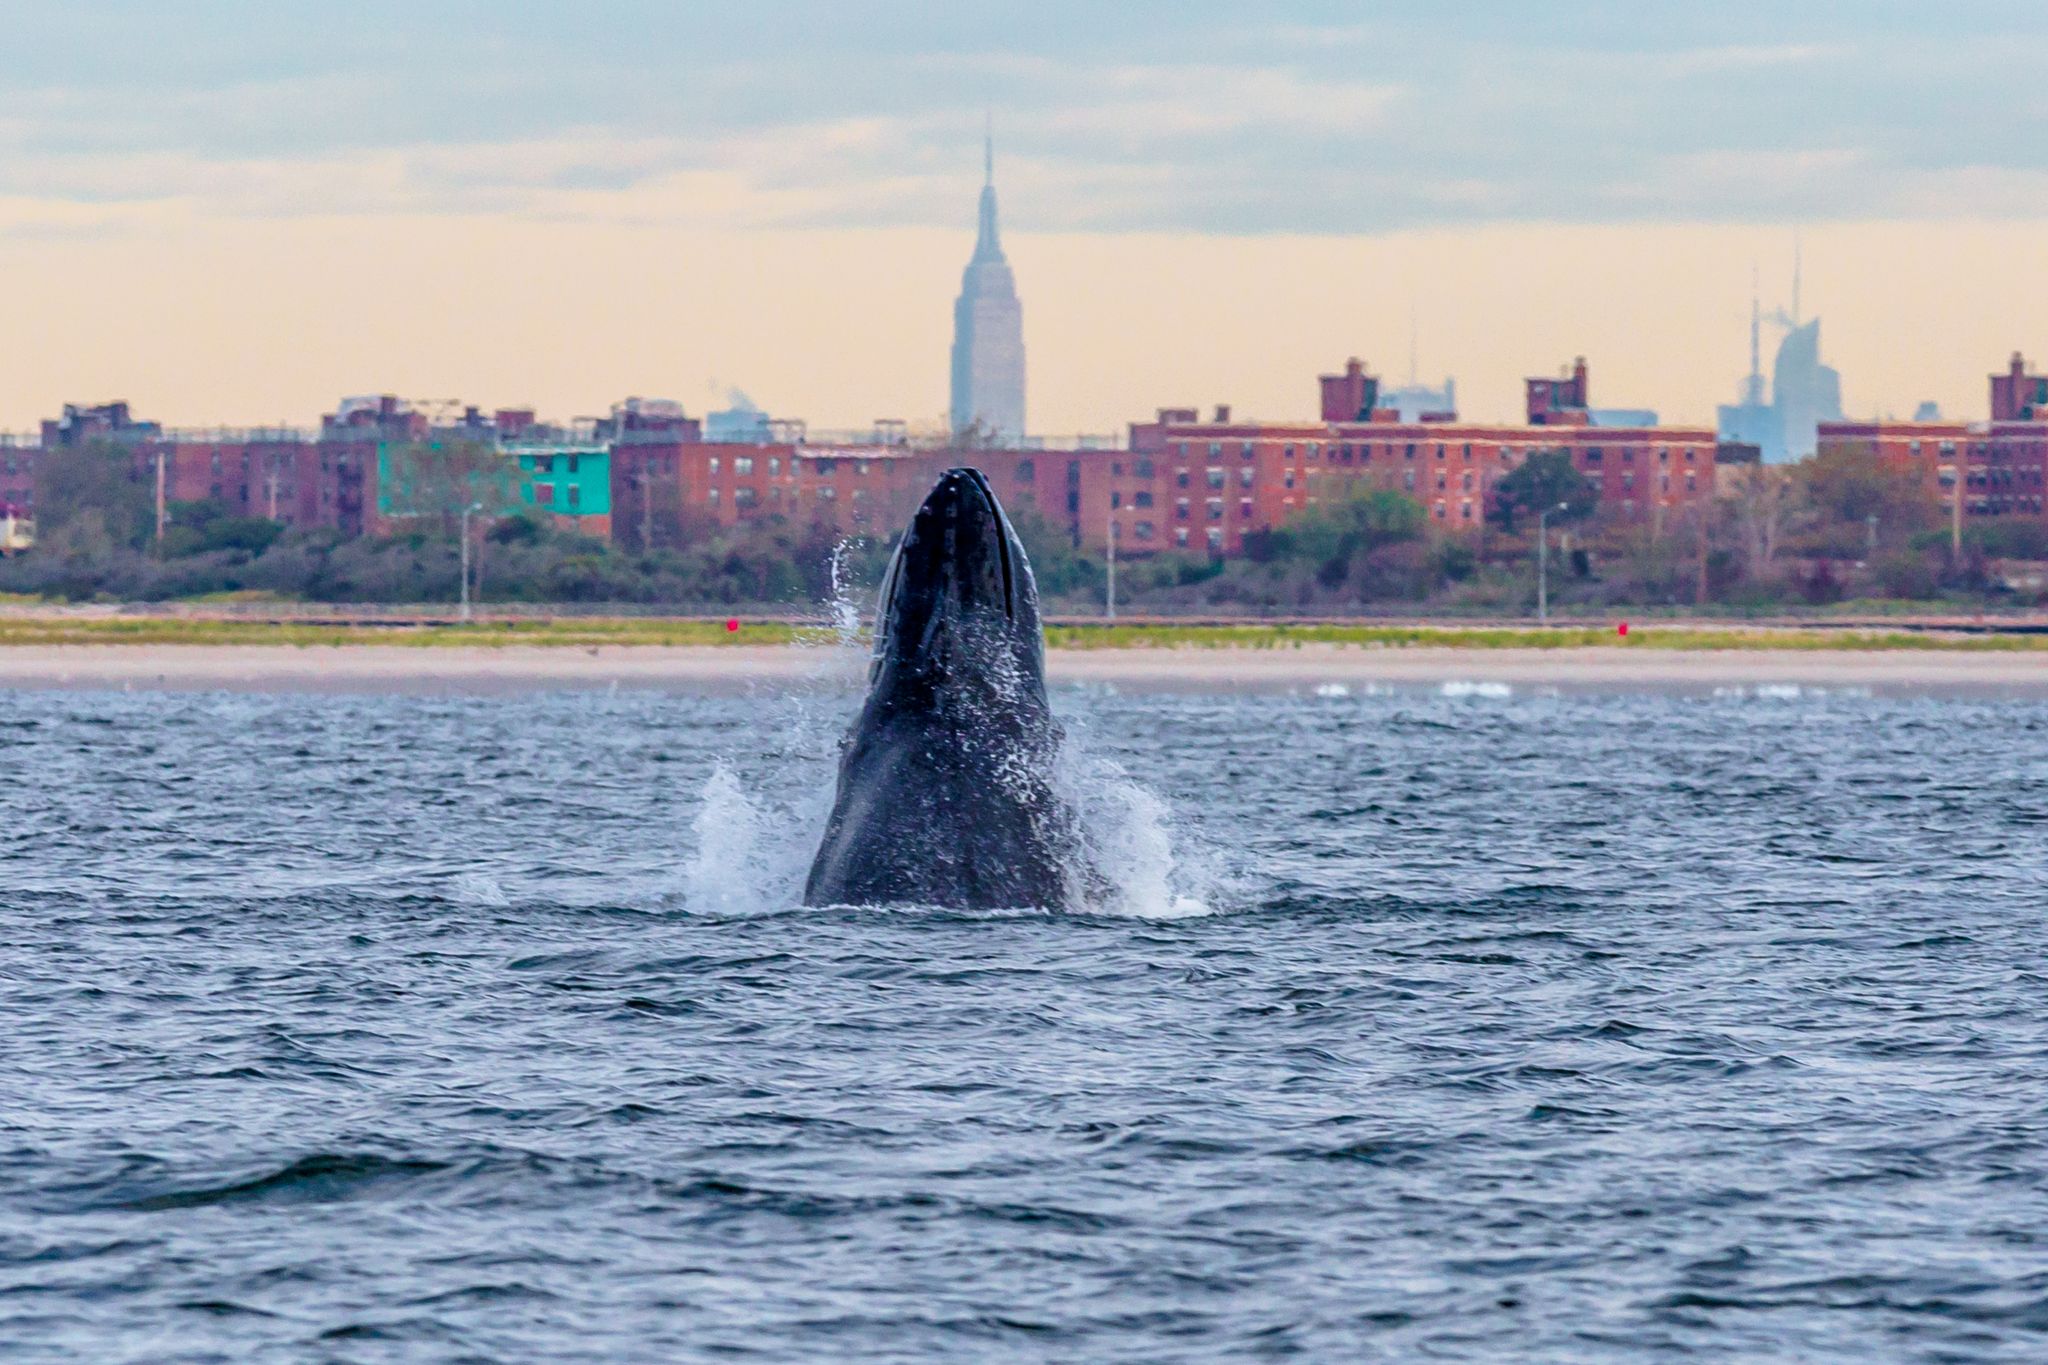 Large numbers of humpback whales have returned to NYC for the first time in a century ...2048 x 1365